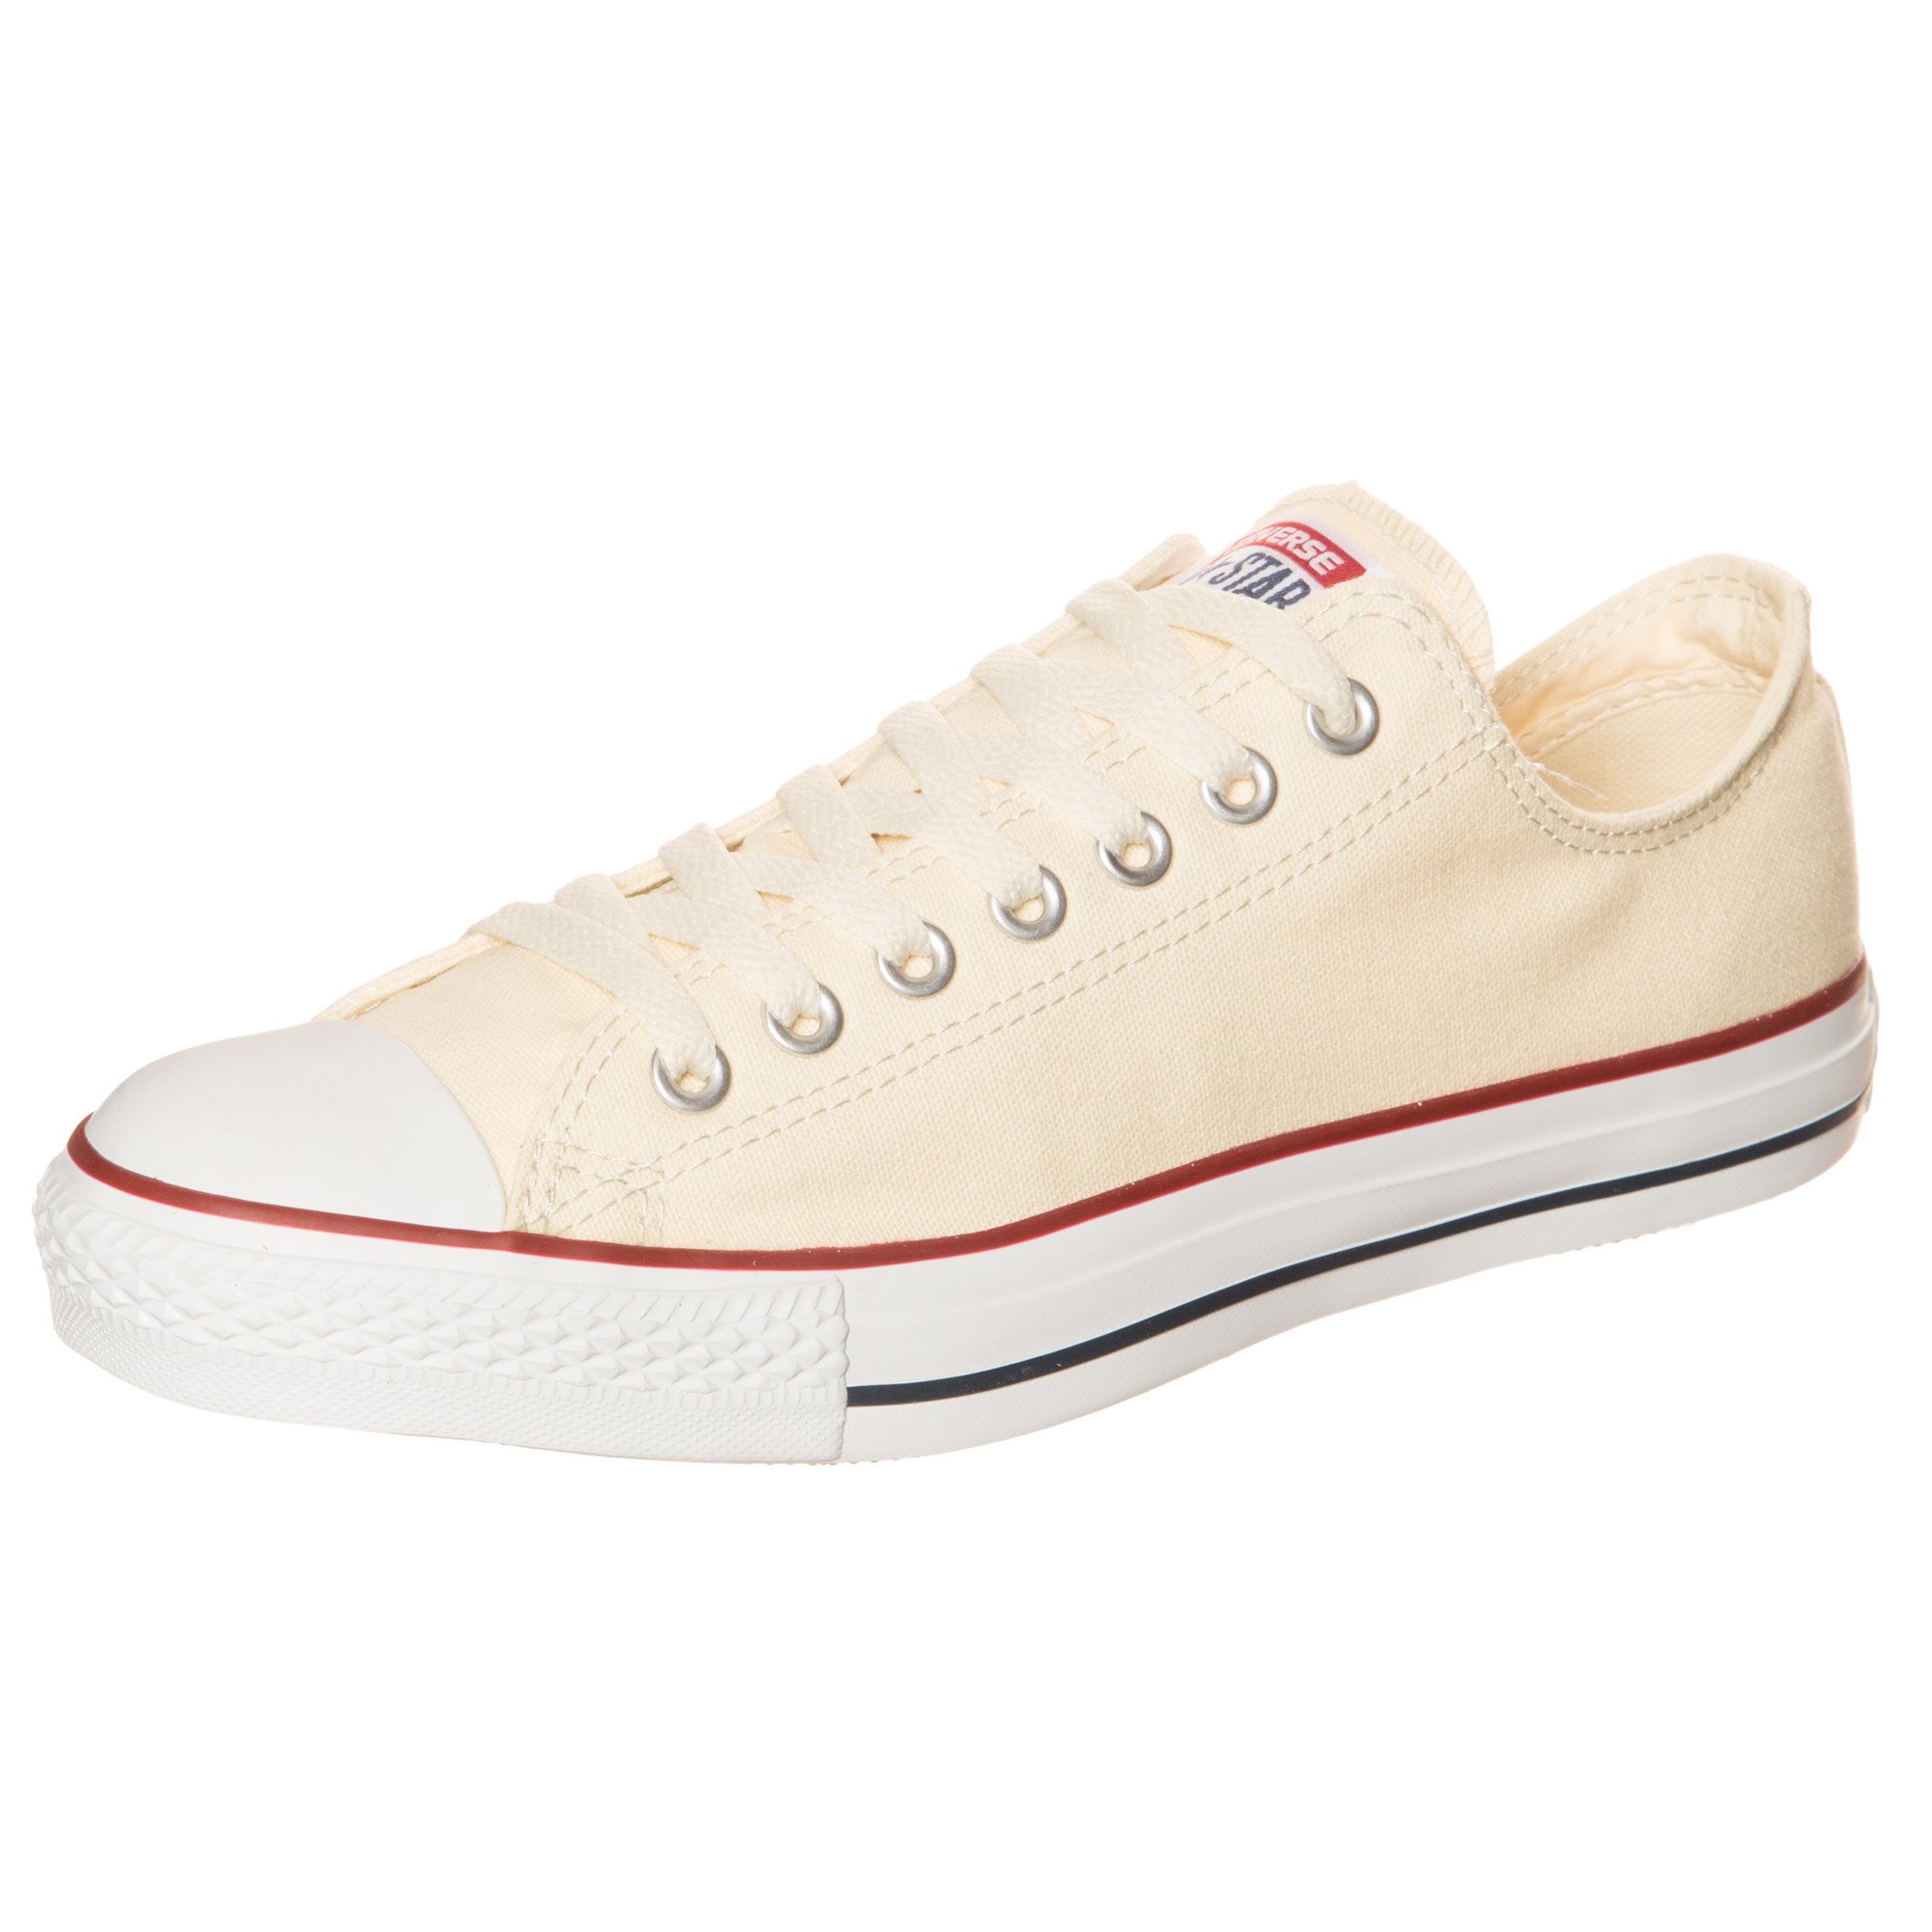 Converse Unisex Chuck Taylor All Star Low Top Natural White Sneakers - 8 B(M) US Women / 6 D(M) US Men